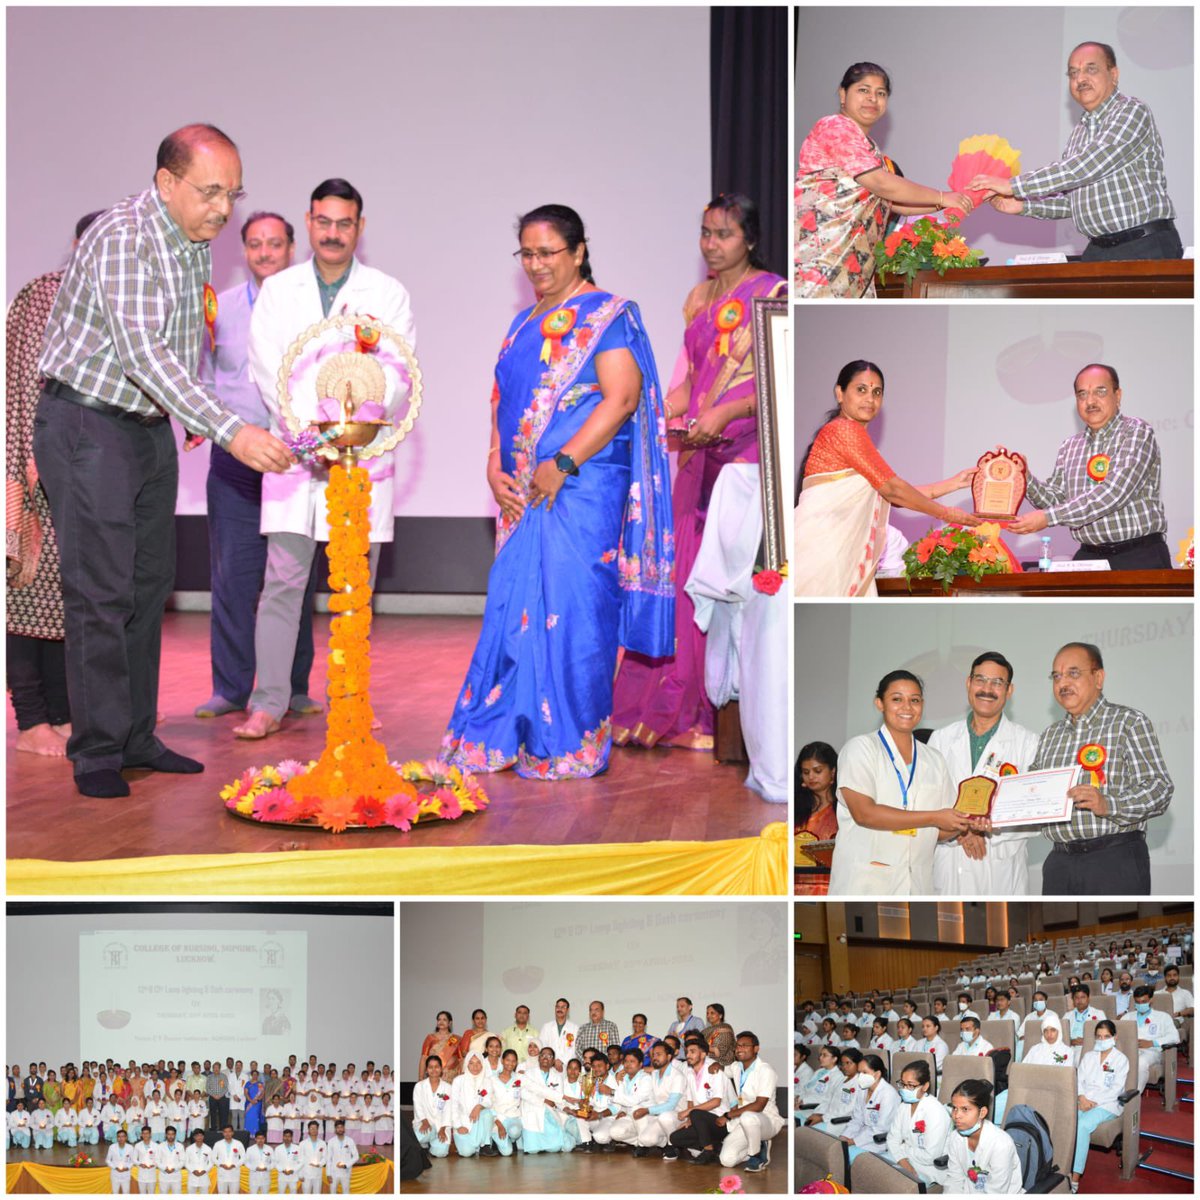 The Lamp Lighting and Oath taking Ceremony of 12th & 13th batch of B.Sc. Nursing students of Nursing College was celebrated with utmost zeal & enthusiasm.